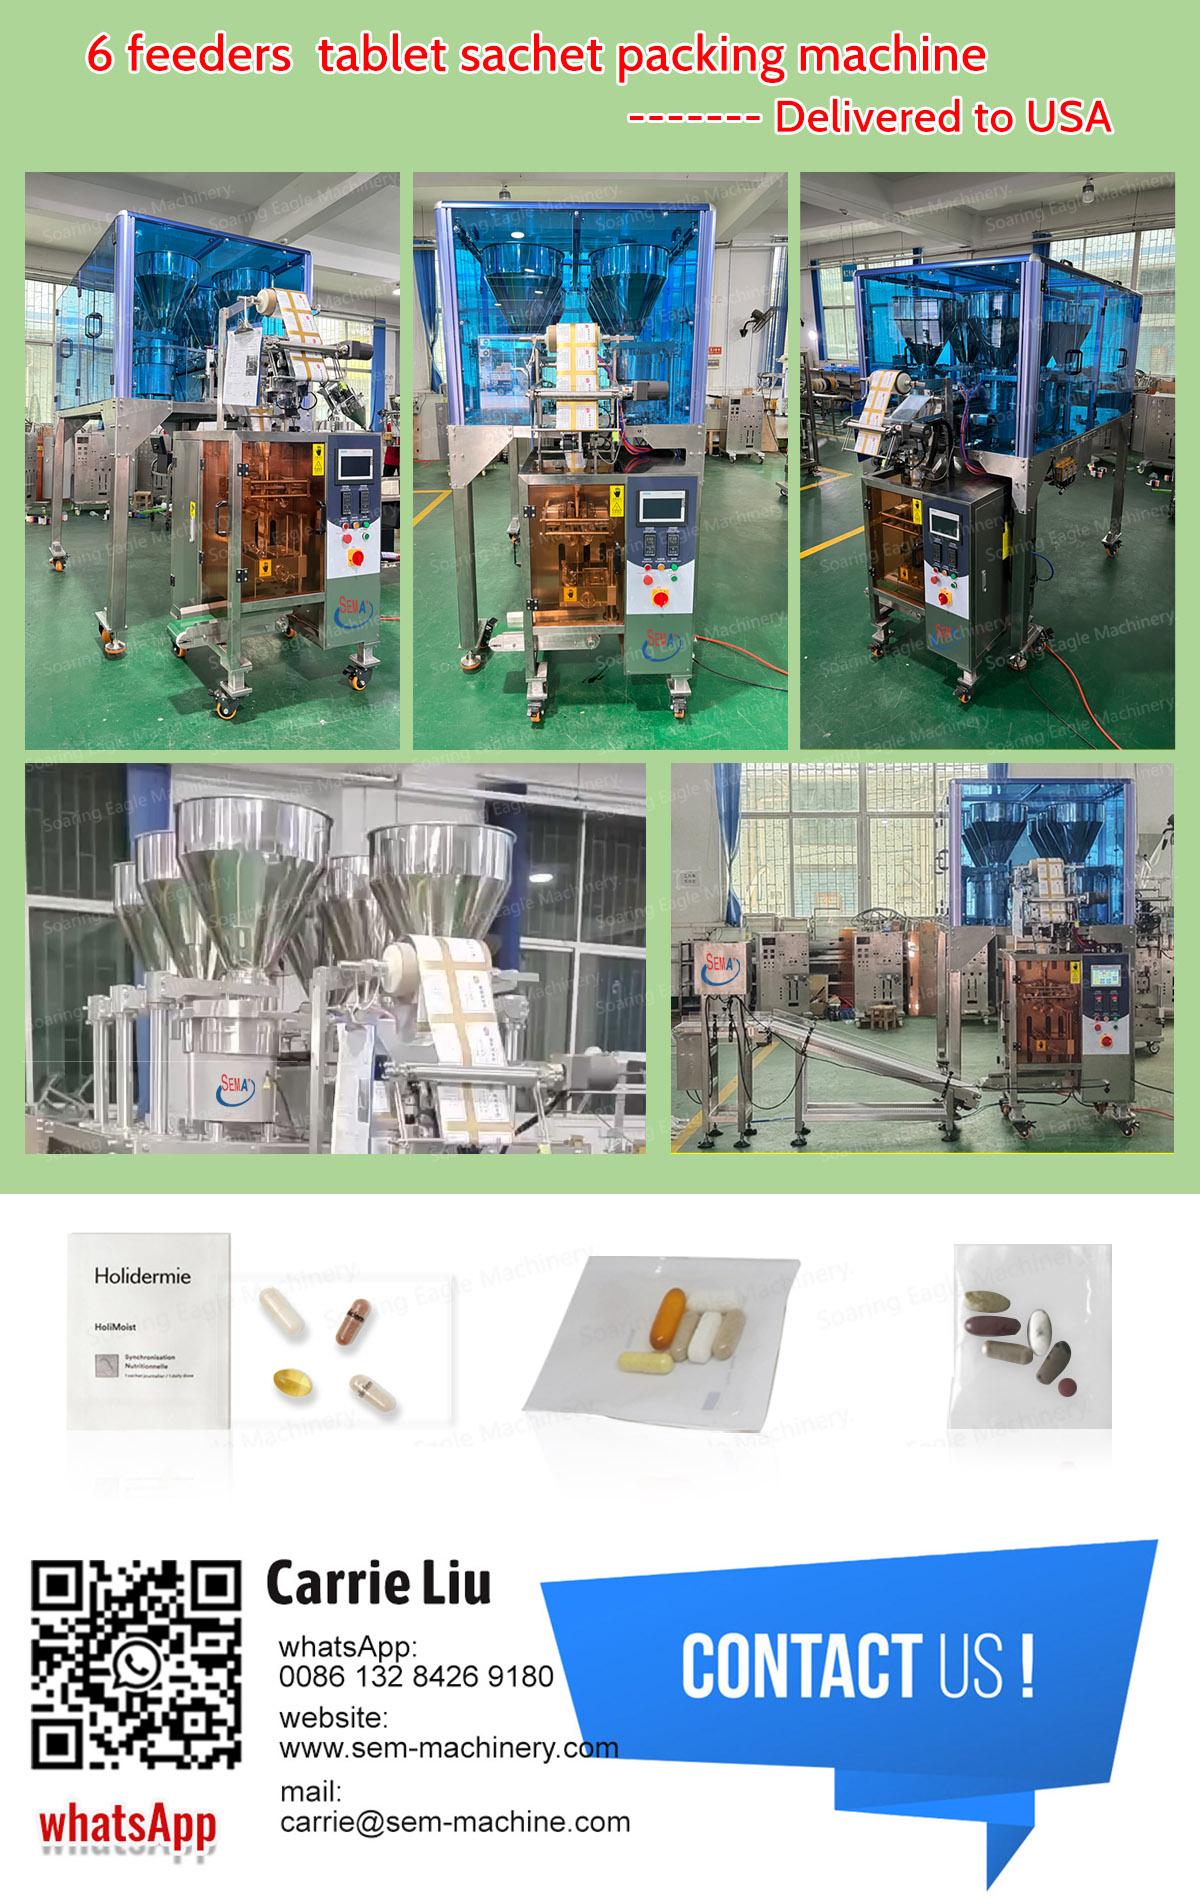 Six feeders sachet packing machine——Deliver to USA